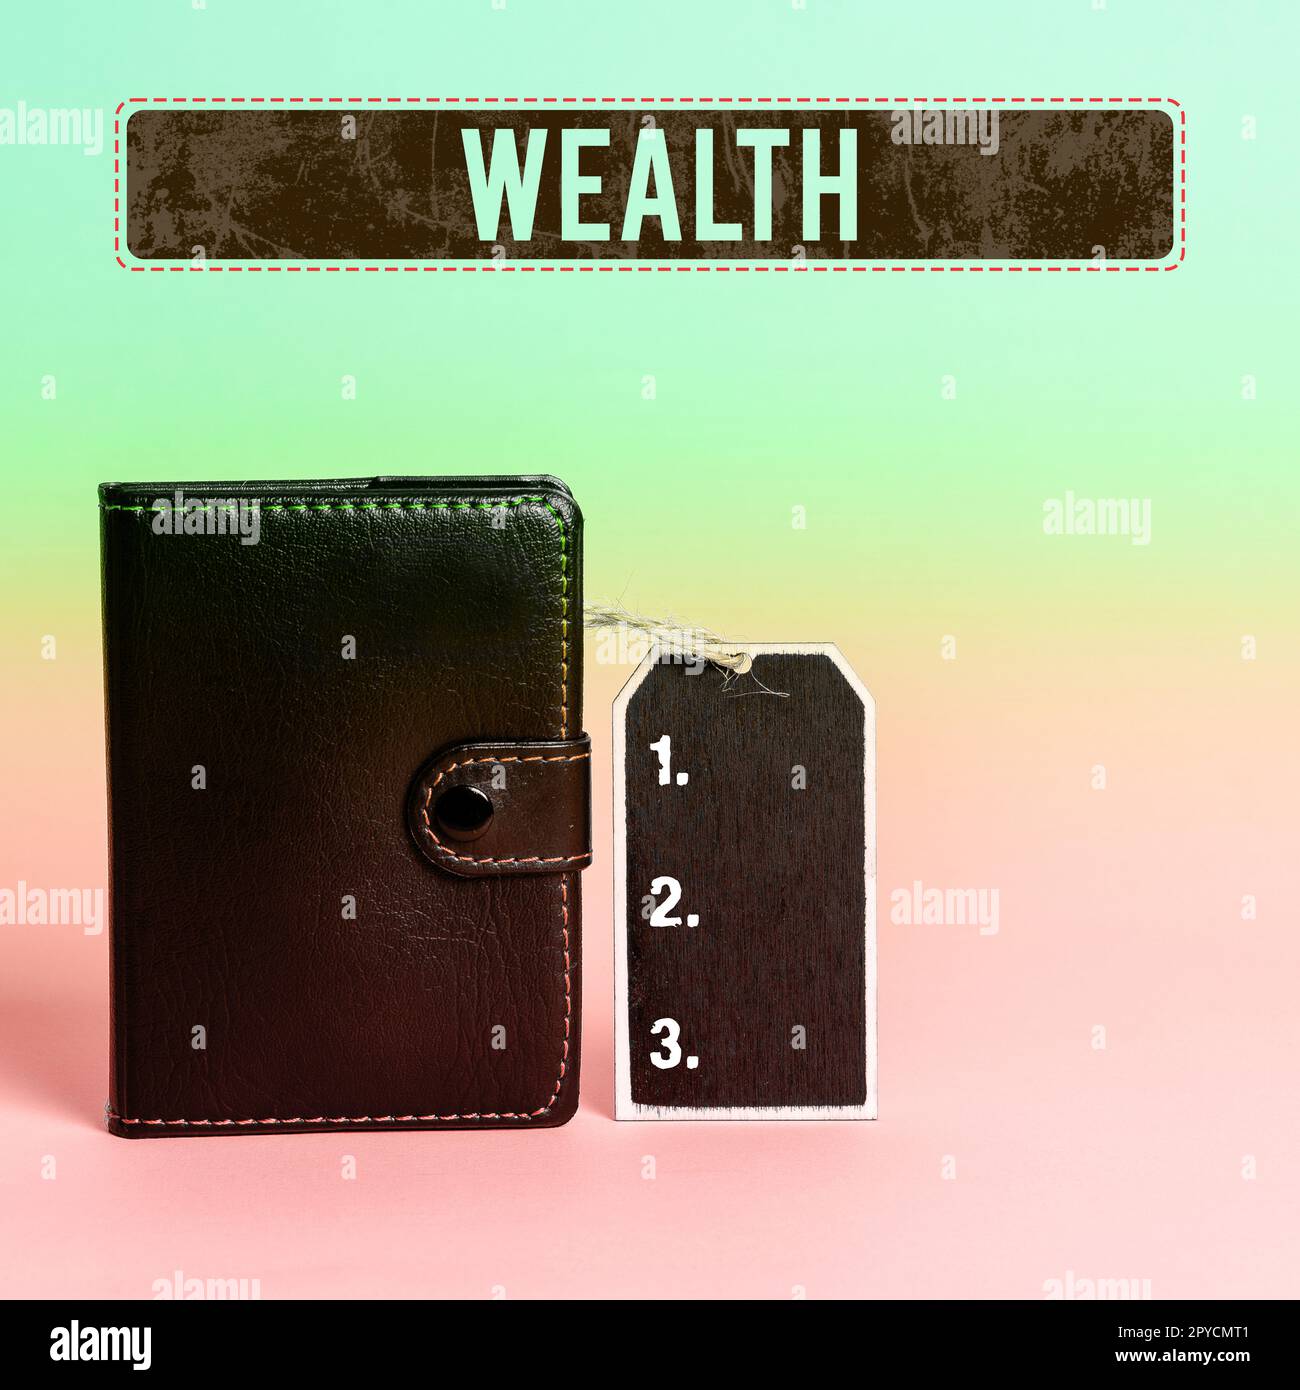 Sign displaying Wealth. Business concept Abundance of valuable possessions or money To be very rich Luxury Stock Photo